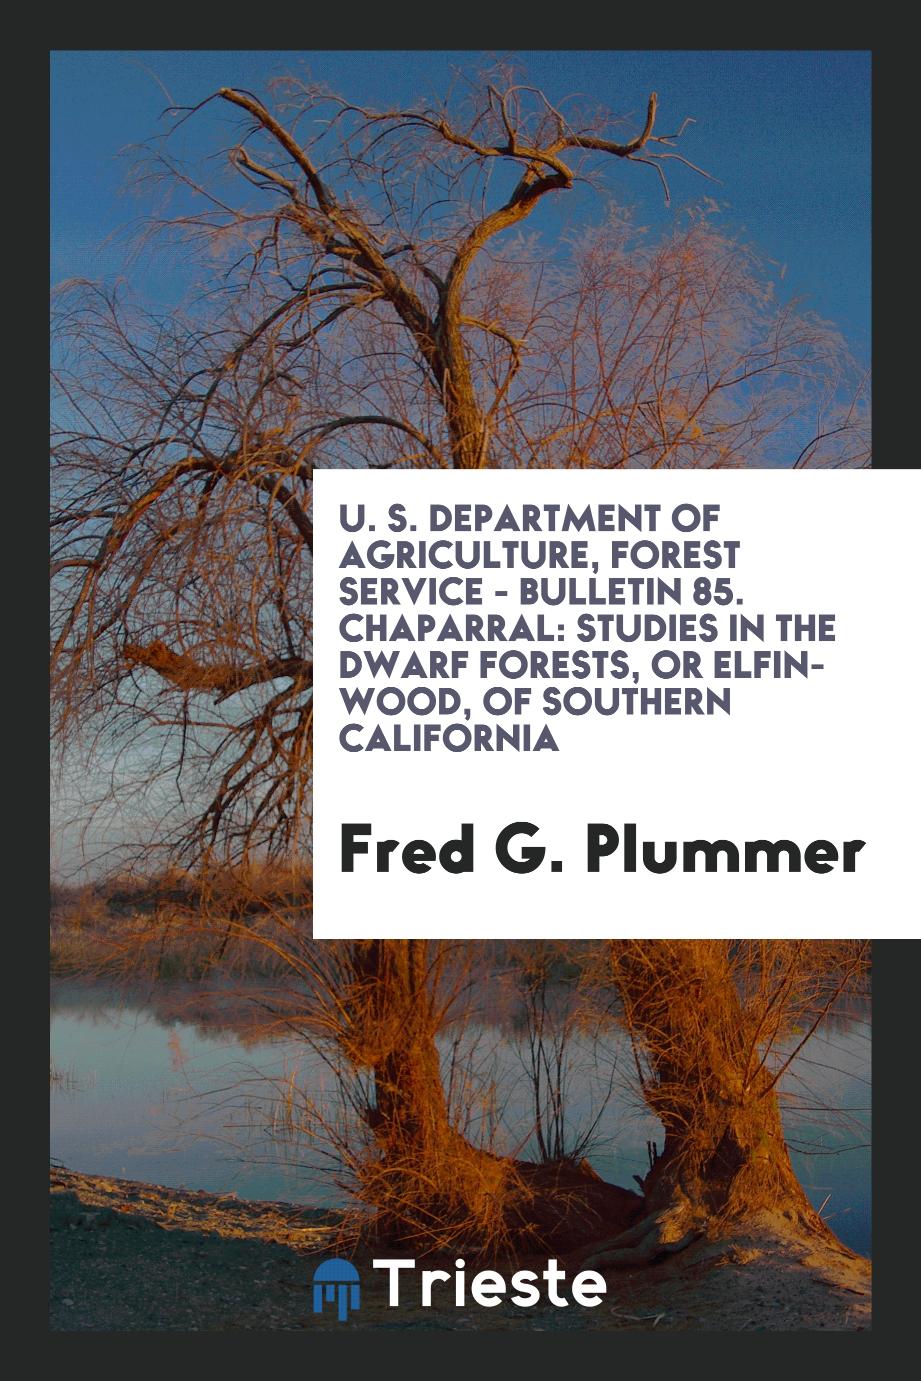 U. S. Department of Agriculture, Forest Service - Bulletin 85. Chaparral: Studies in the Dwarf Forests, Or Elfin-wood, of Southern California